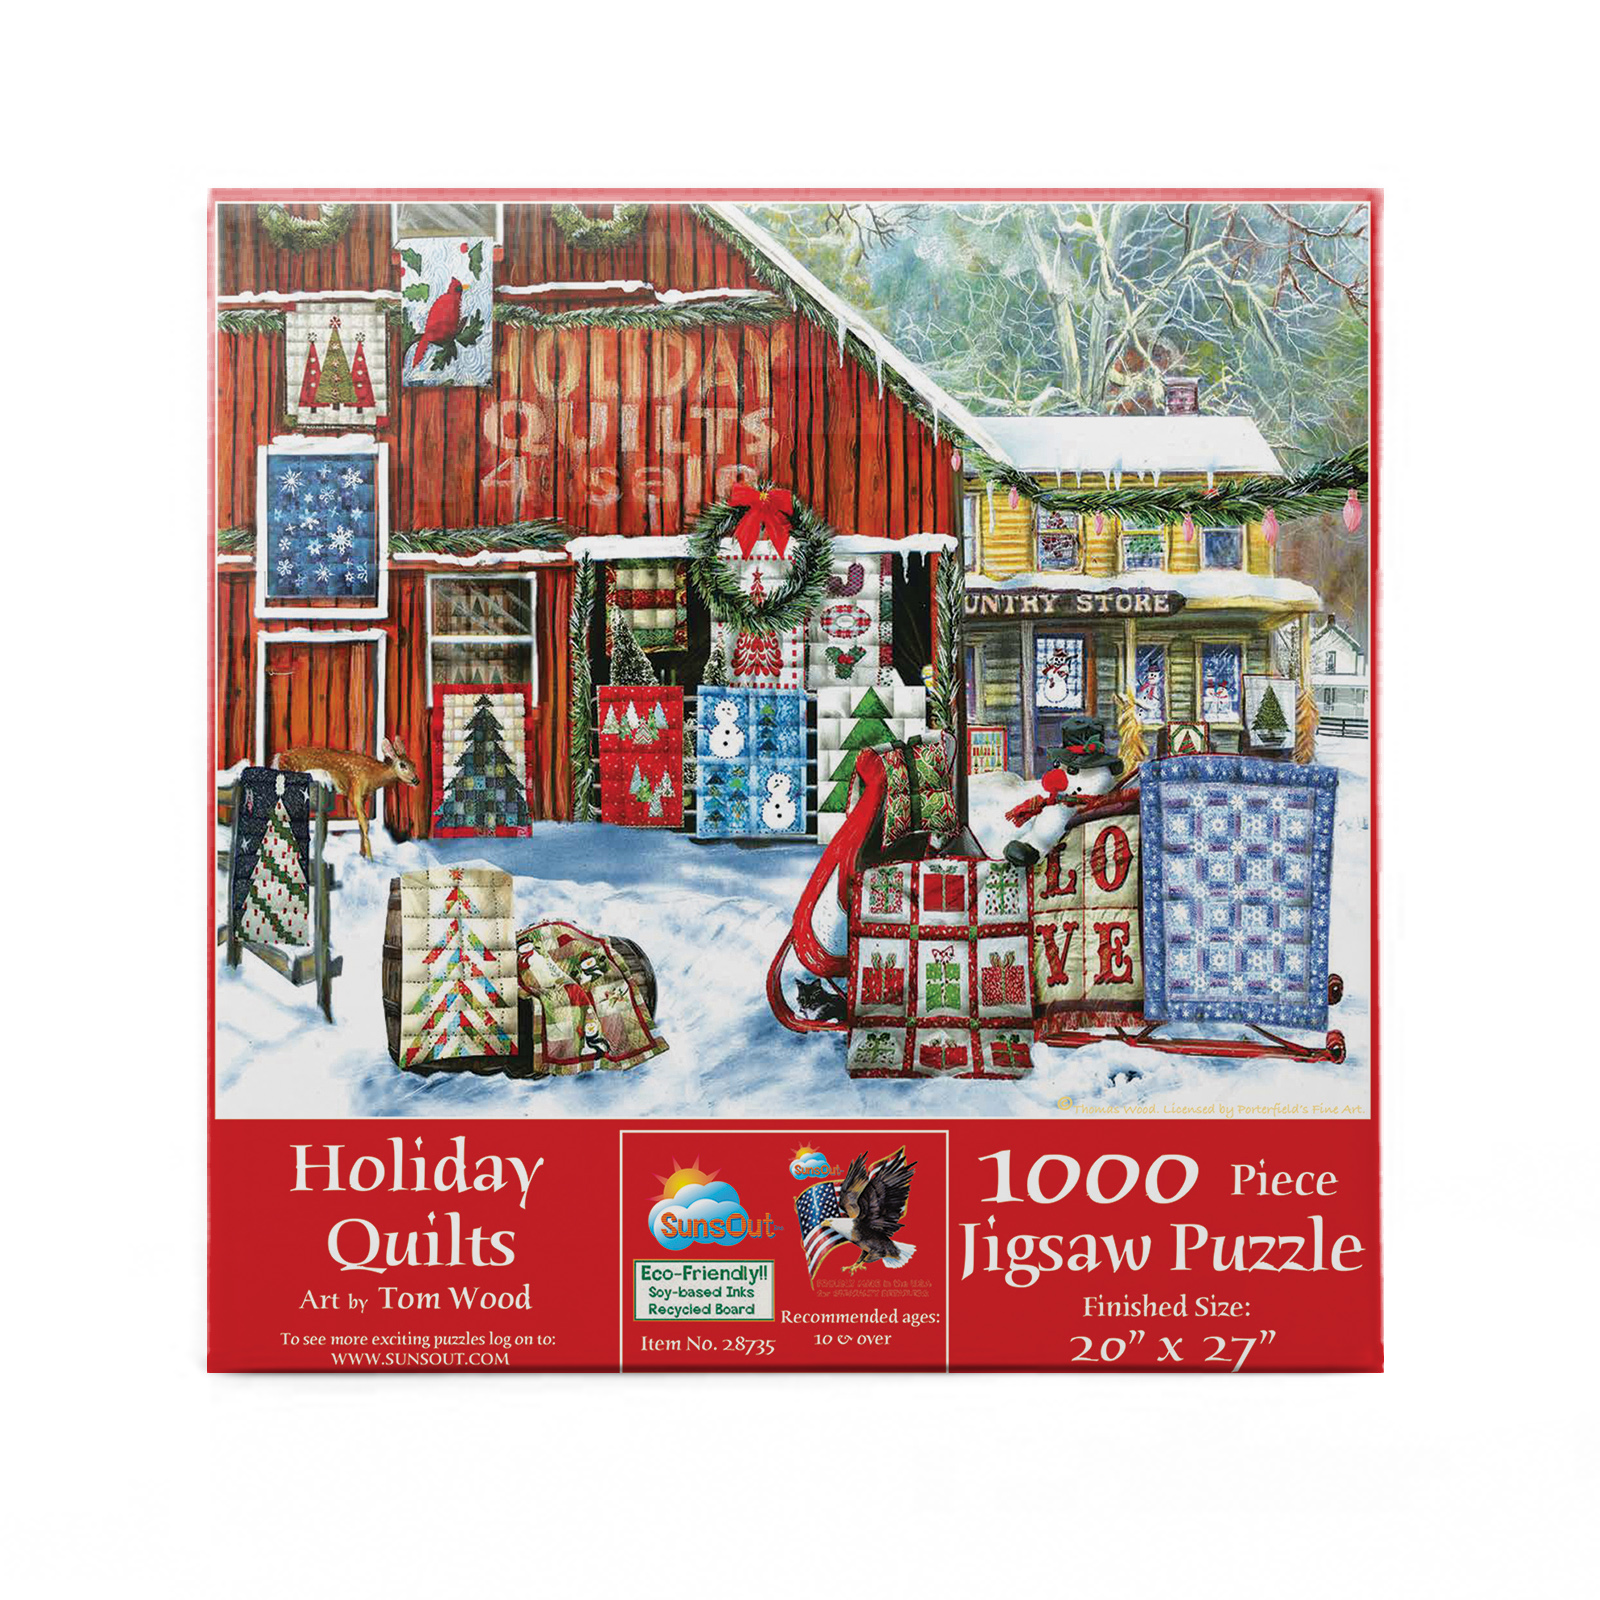 Holiday Quilts